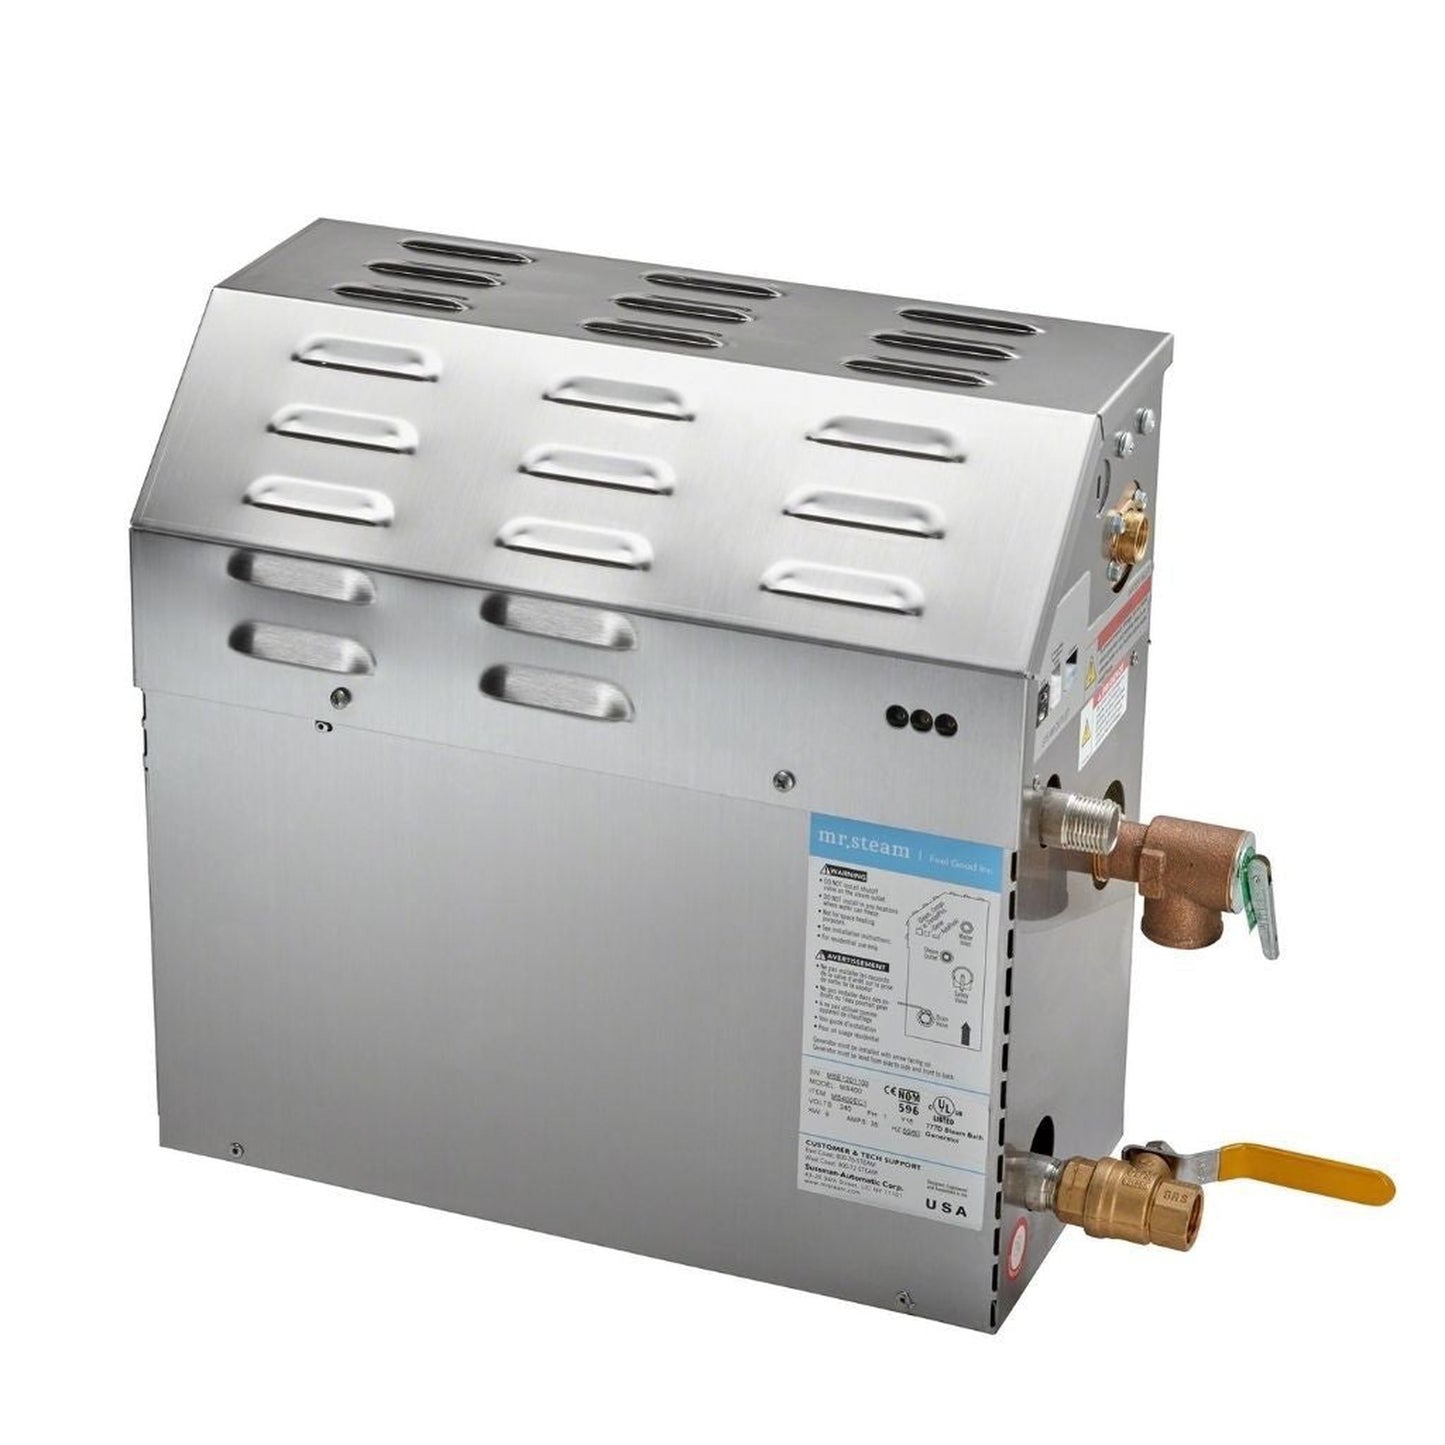 MrSteam e-SERIES MS90EC1 5 kW Steam Generator with iTempoPlus Control With Butler Package